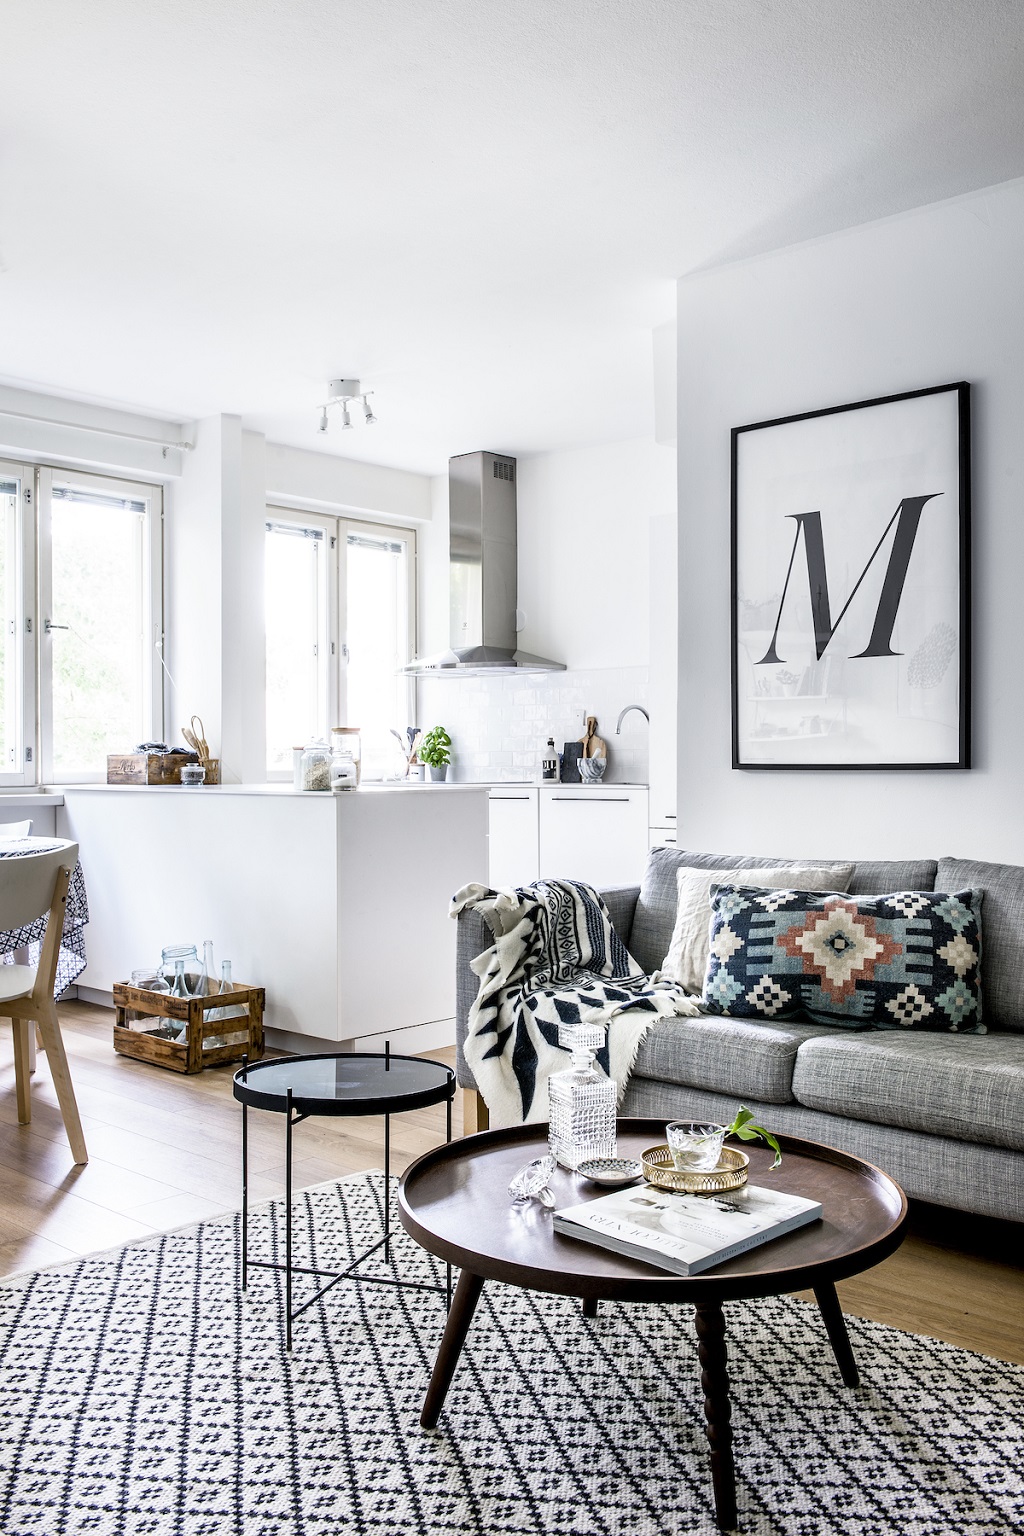 Bright Nordic Style Kitchen and Living Room Apartment Interior By Laura Seppanen